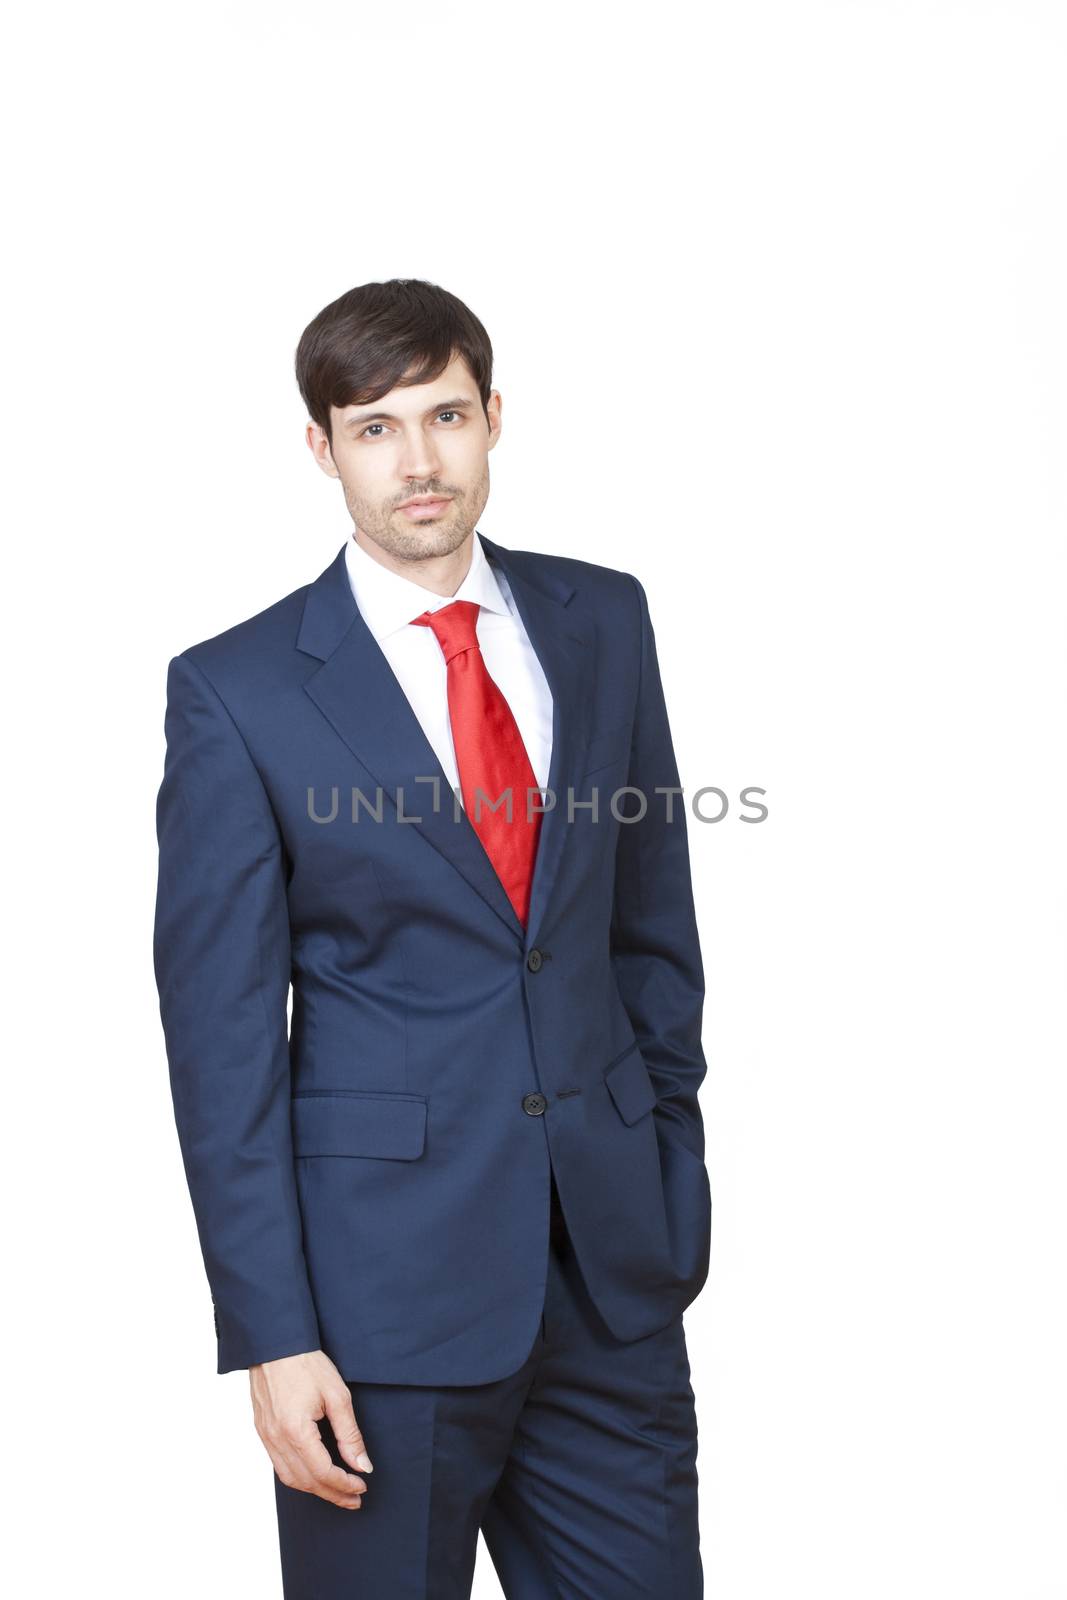 business executive in suit by courtyardpix